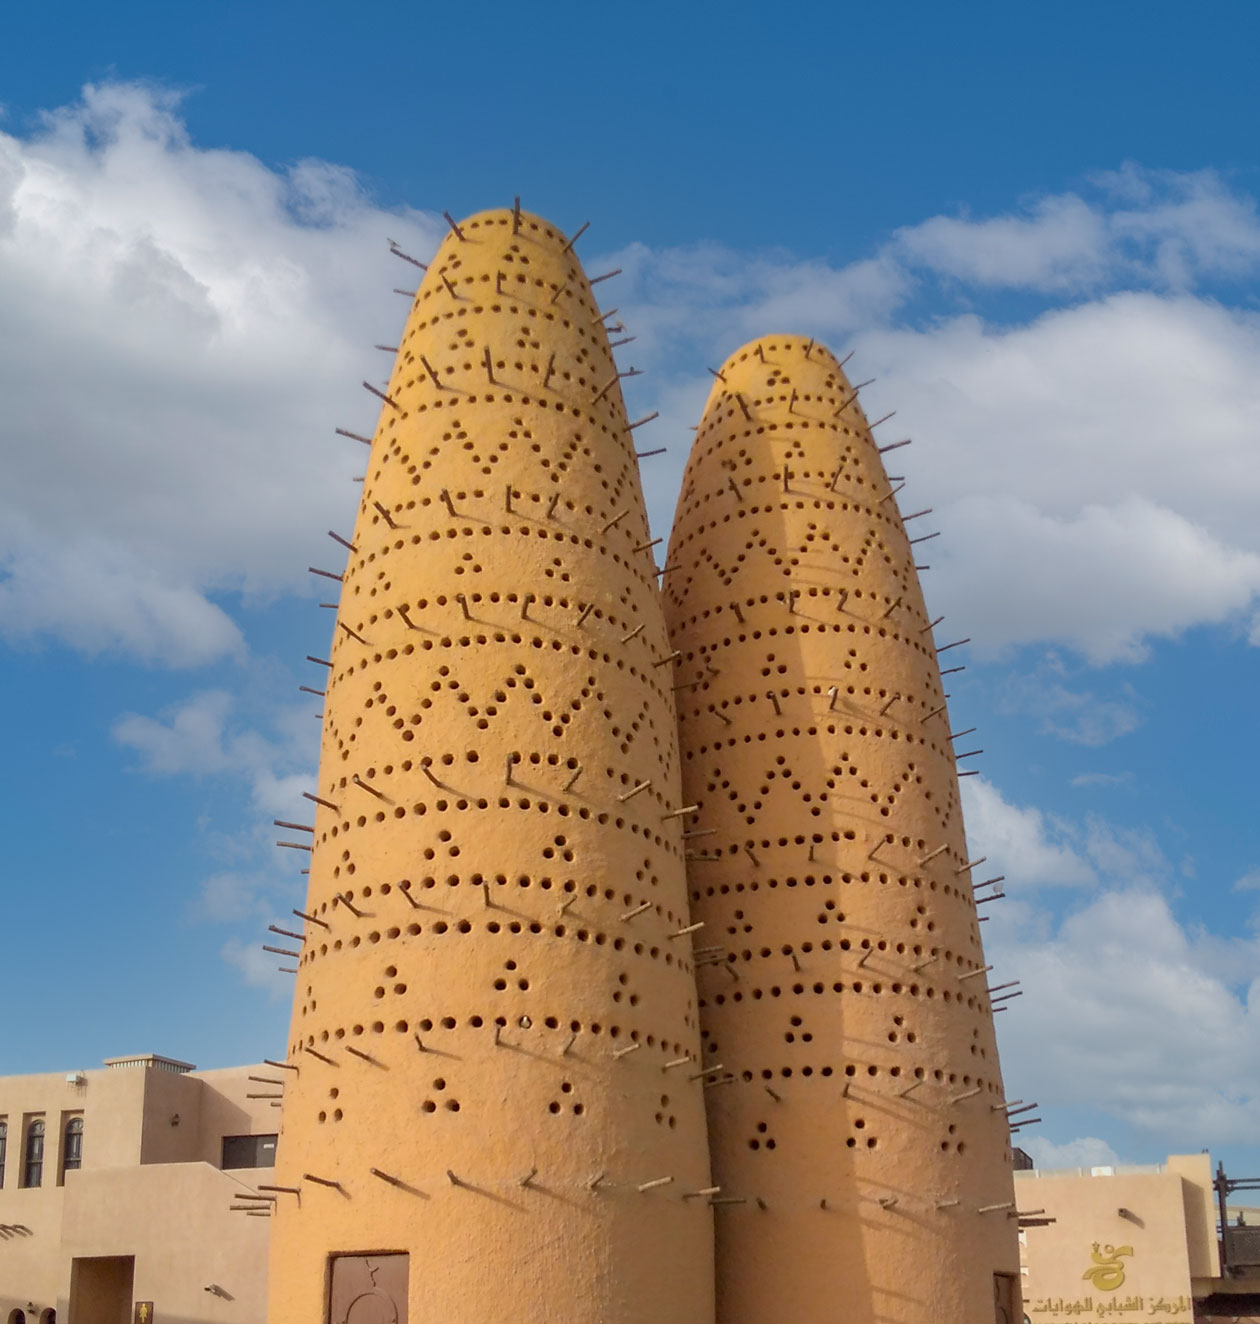 The most famous pigeon towers in Qatar can be seen at Katara Cultural Village